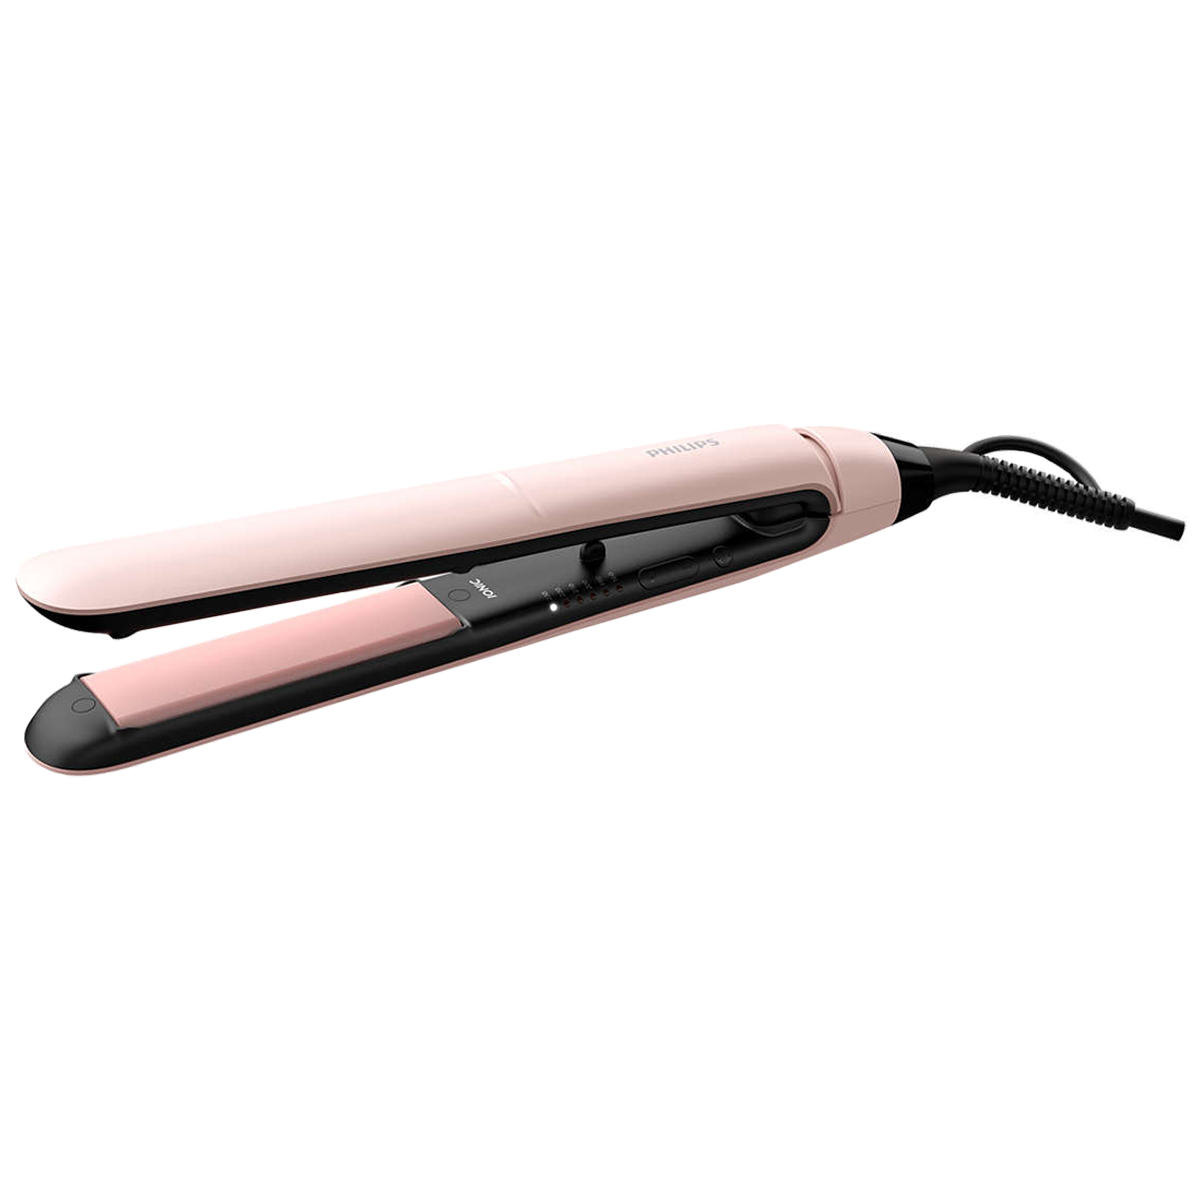 Philips Advanced KeraShine Corded Hair Straightener (ThermoProtect Technology, BHS378/10, Pink/Black)_1